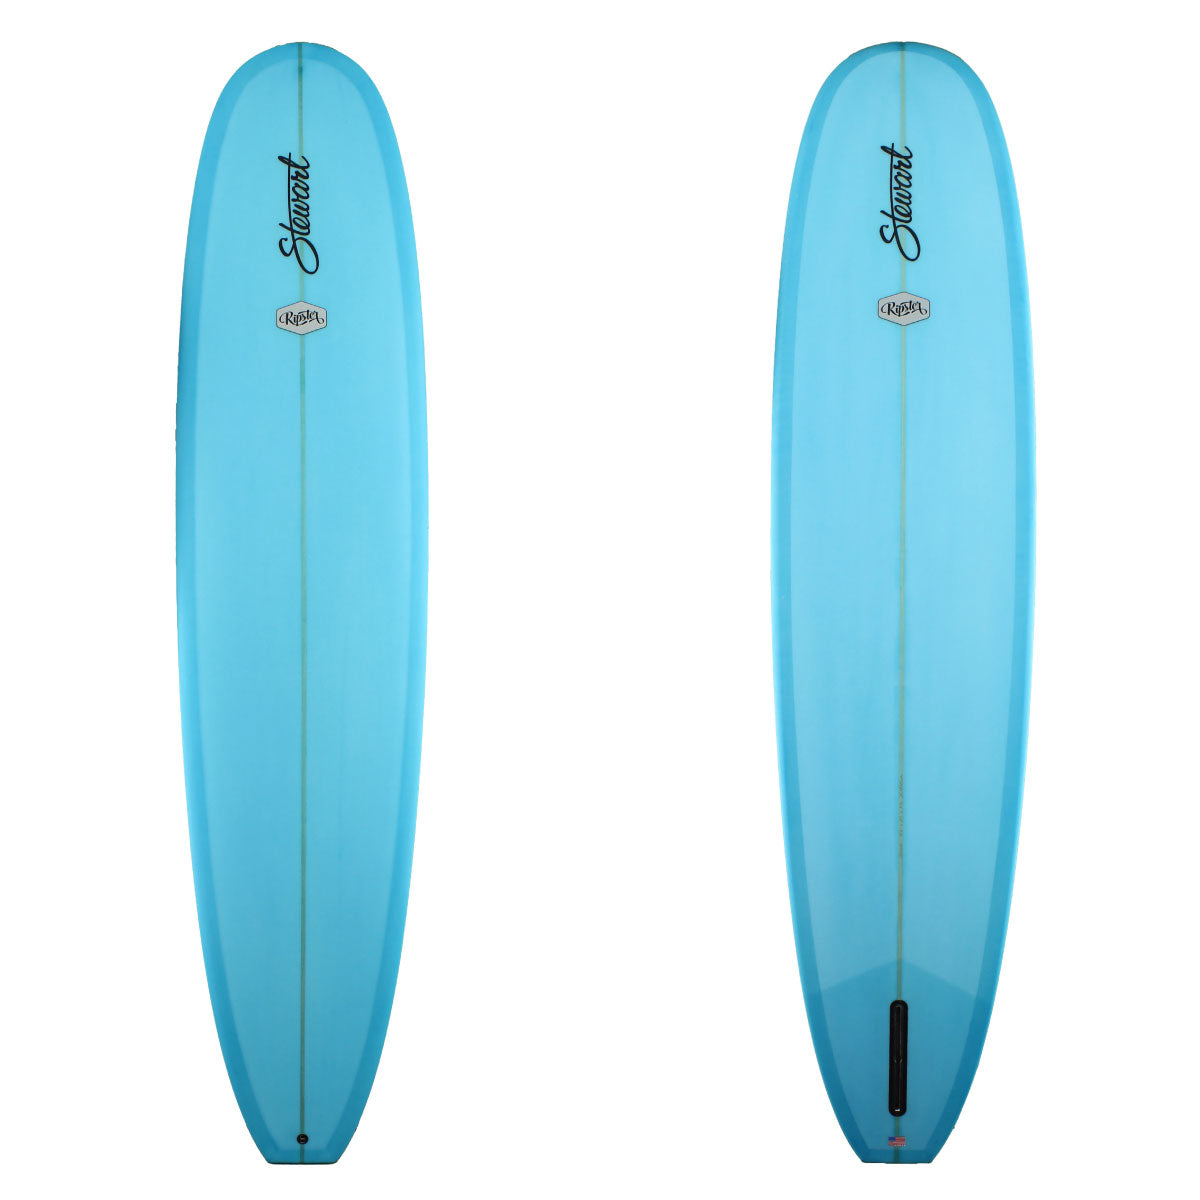 Stewart Surfboards 9'6 Ripster with blue resin tint deck and bottom